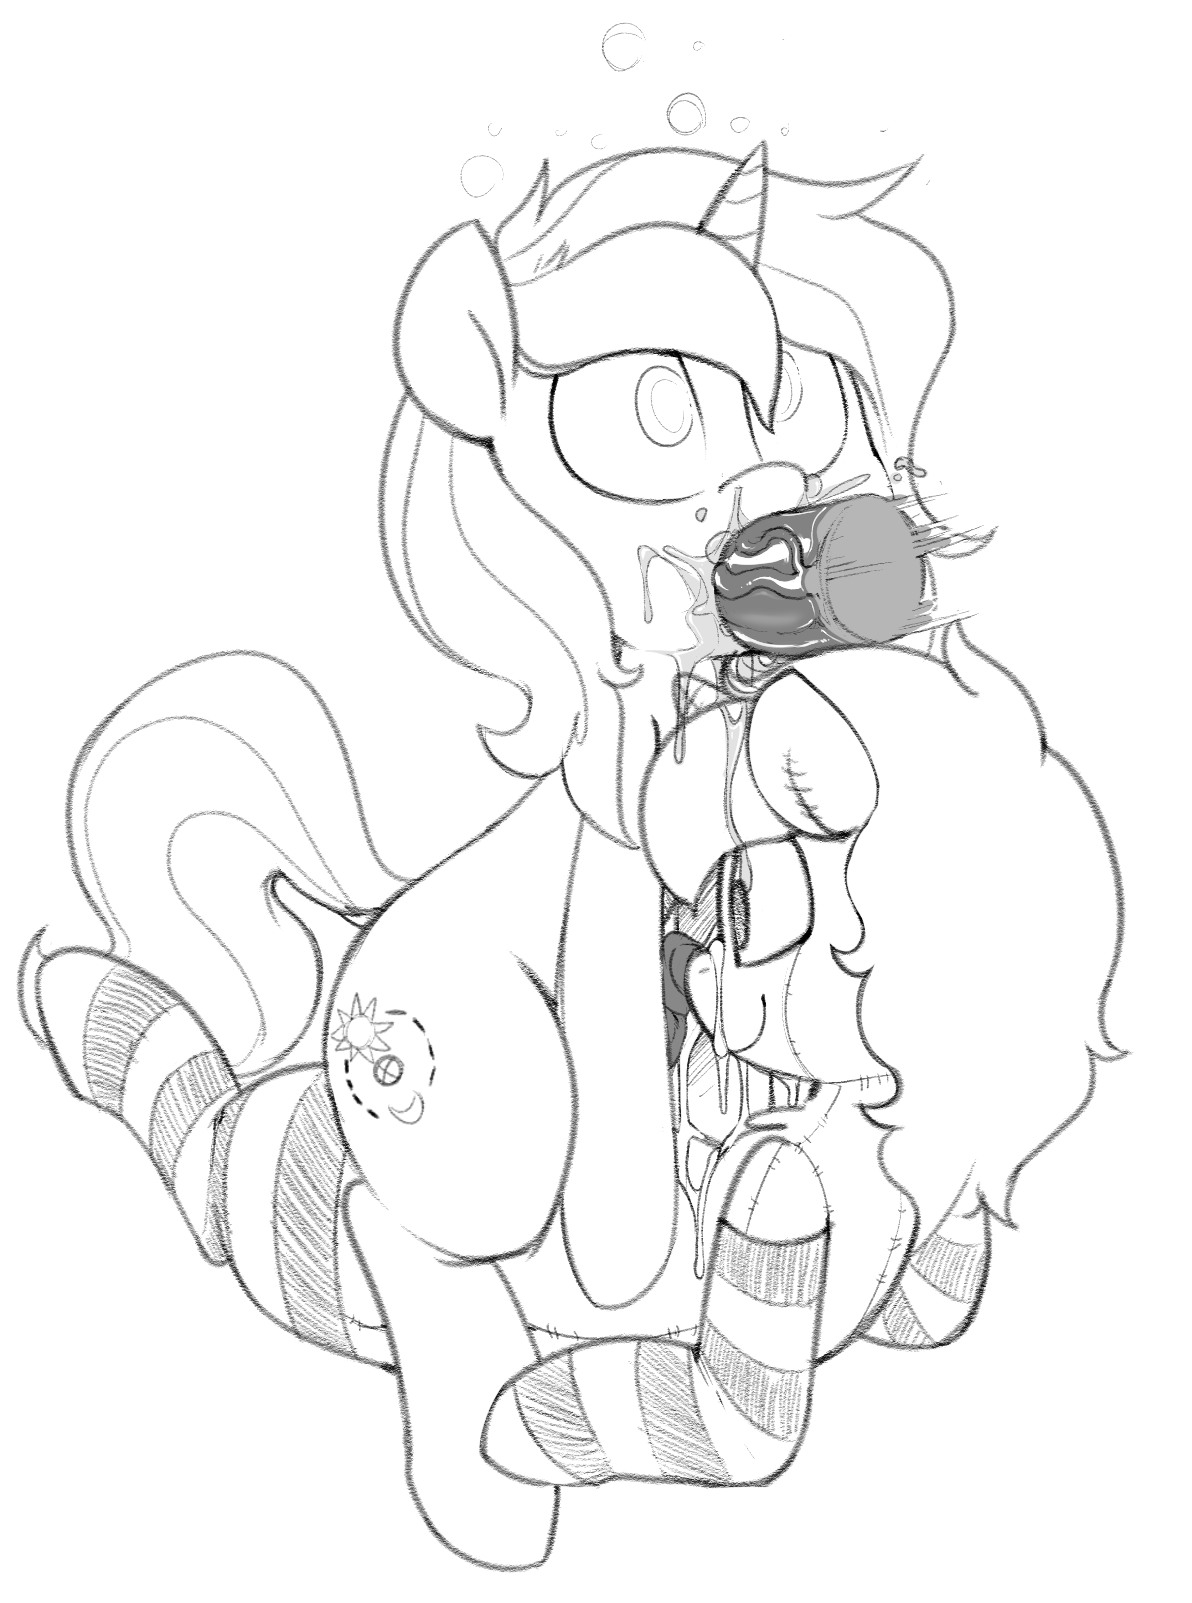 You ever seen a pony getting pegged by a doll verison of themselves while they’re